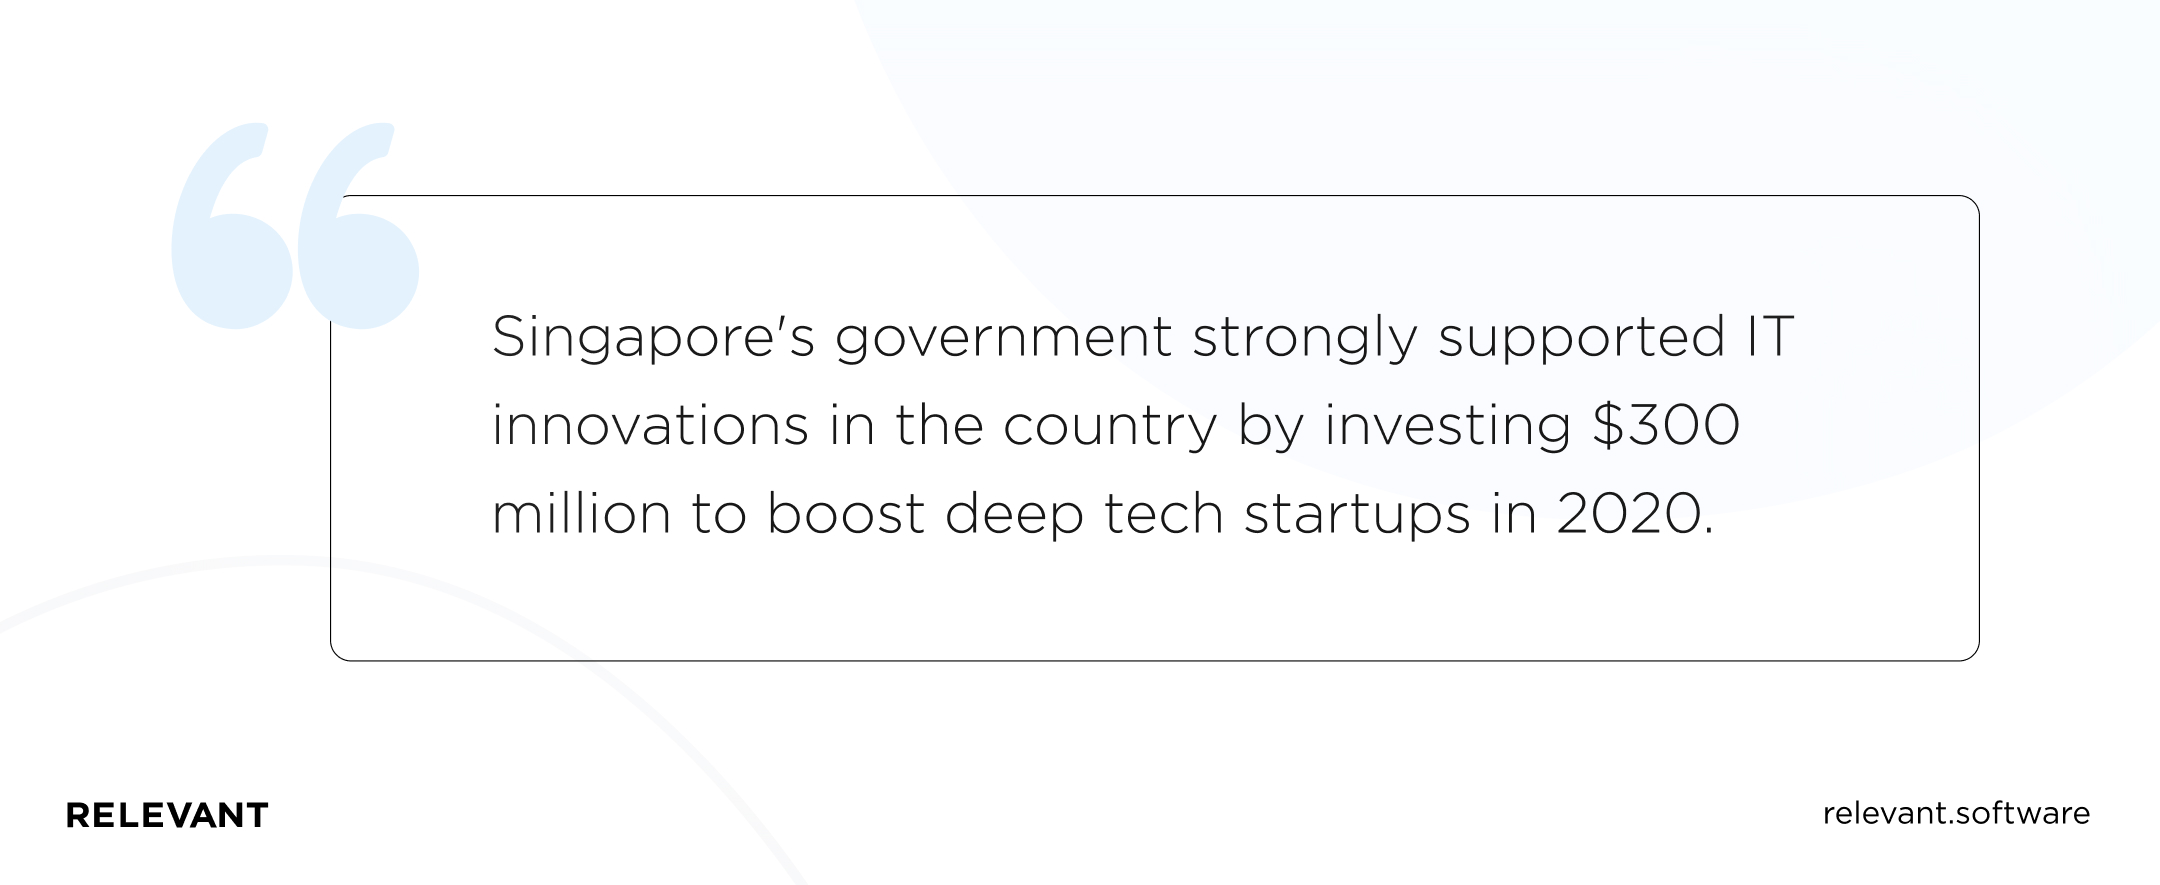 Singapore's government strongly supported IT innovations in the country by investing $300 million to boost deep tech startups in 2020.